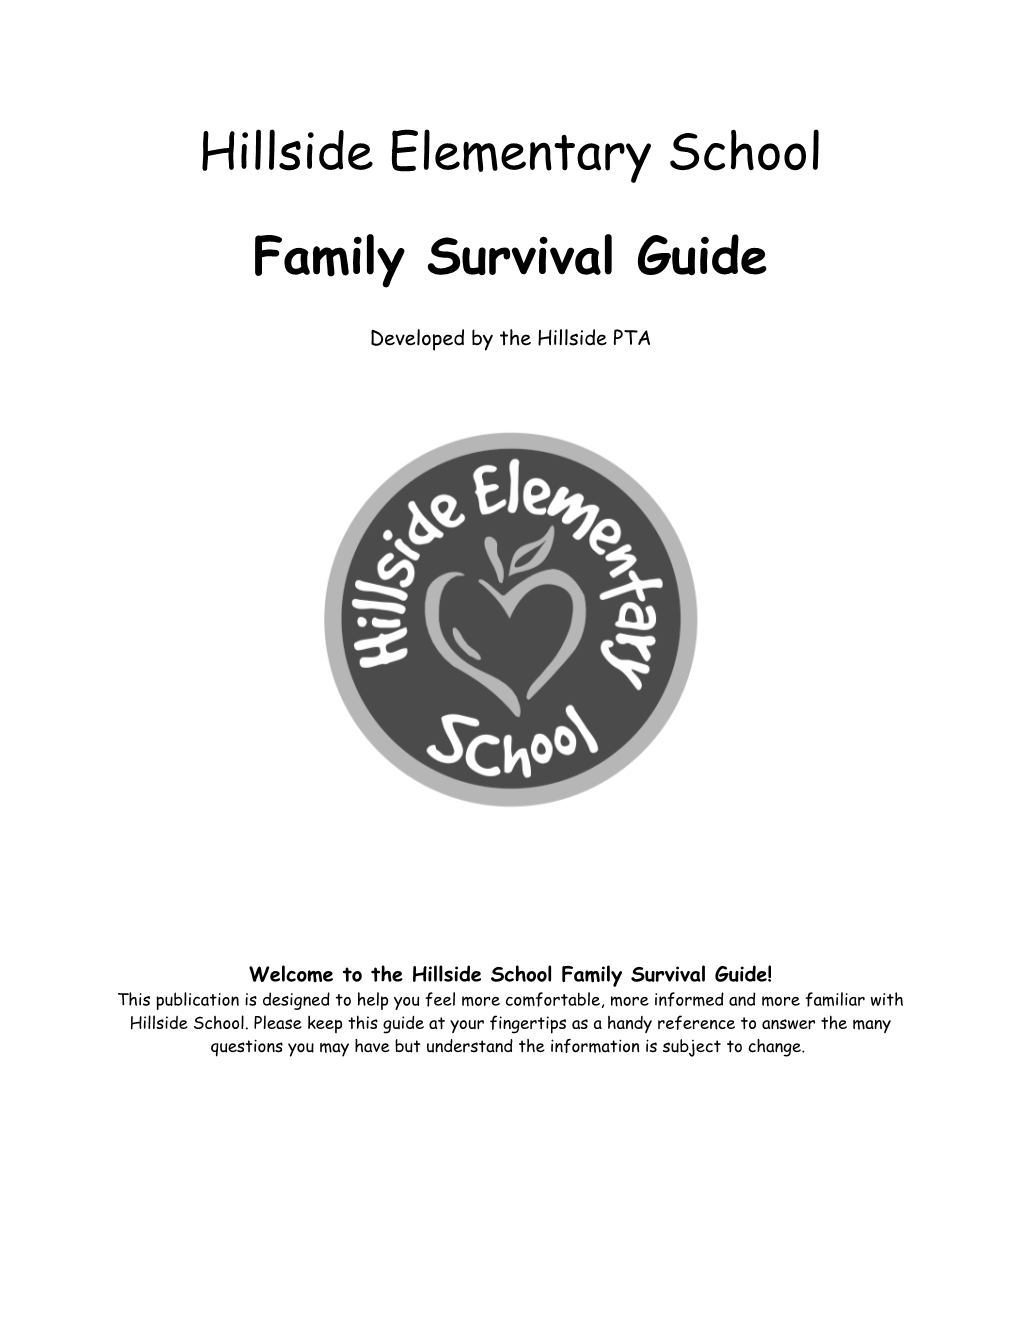 Welcome to the Collins School New Family Survival Guide